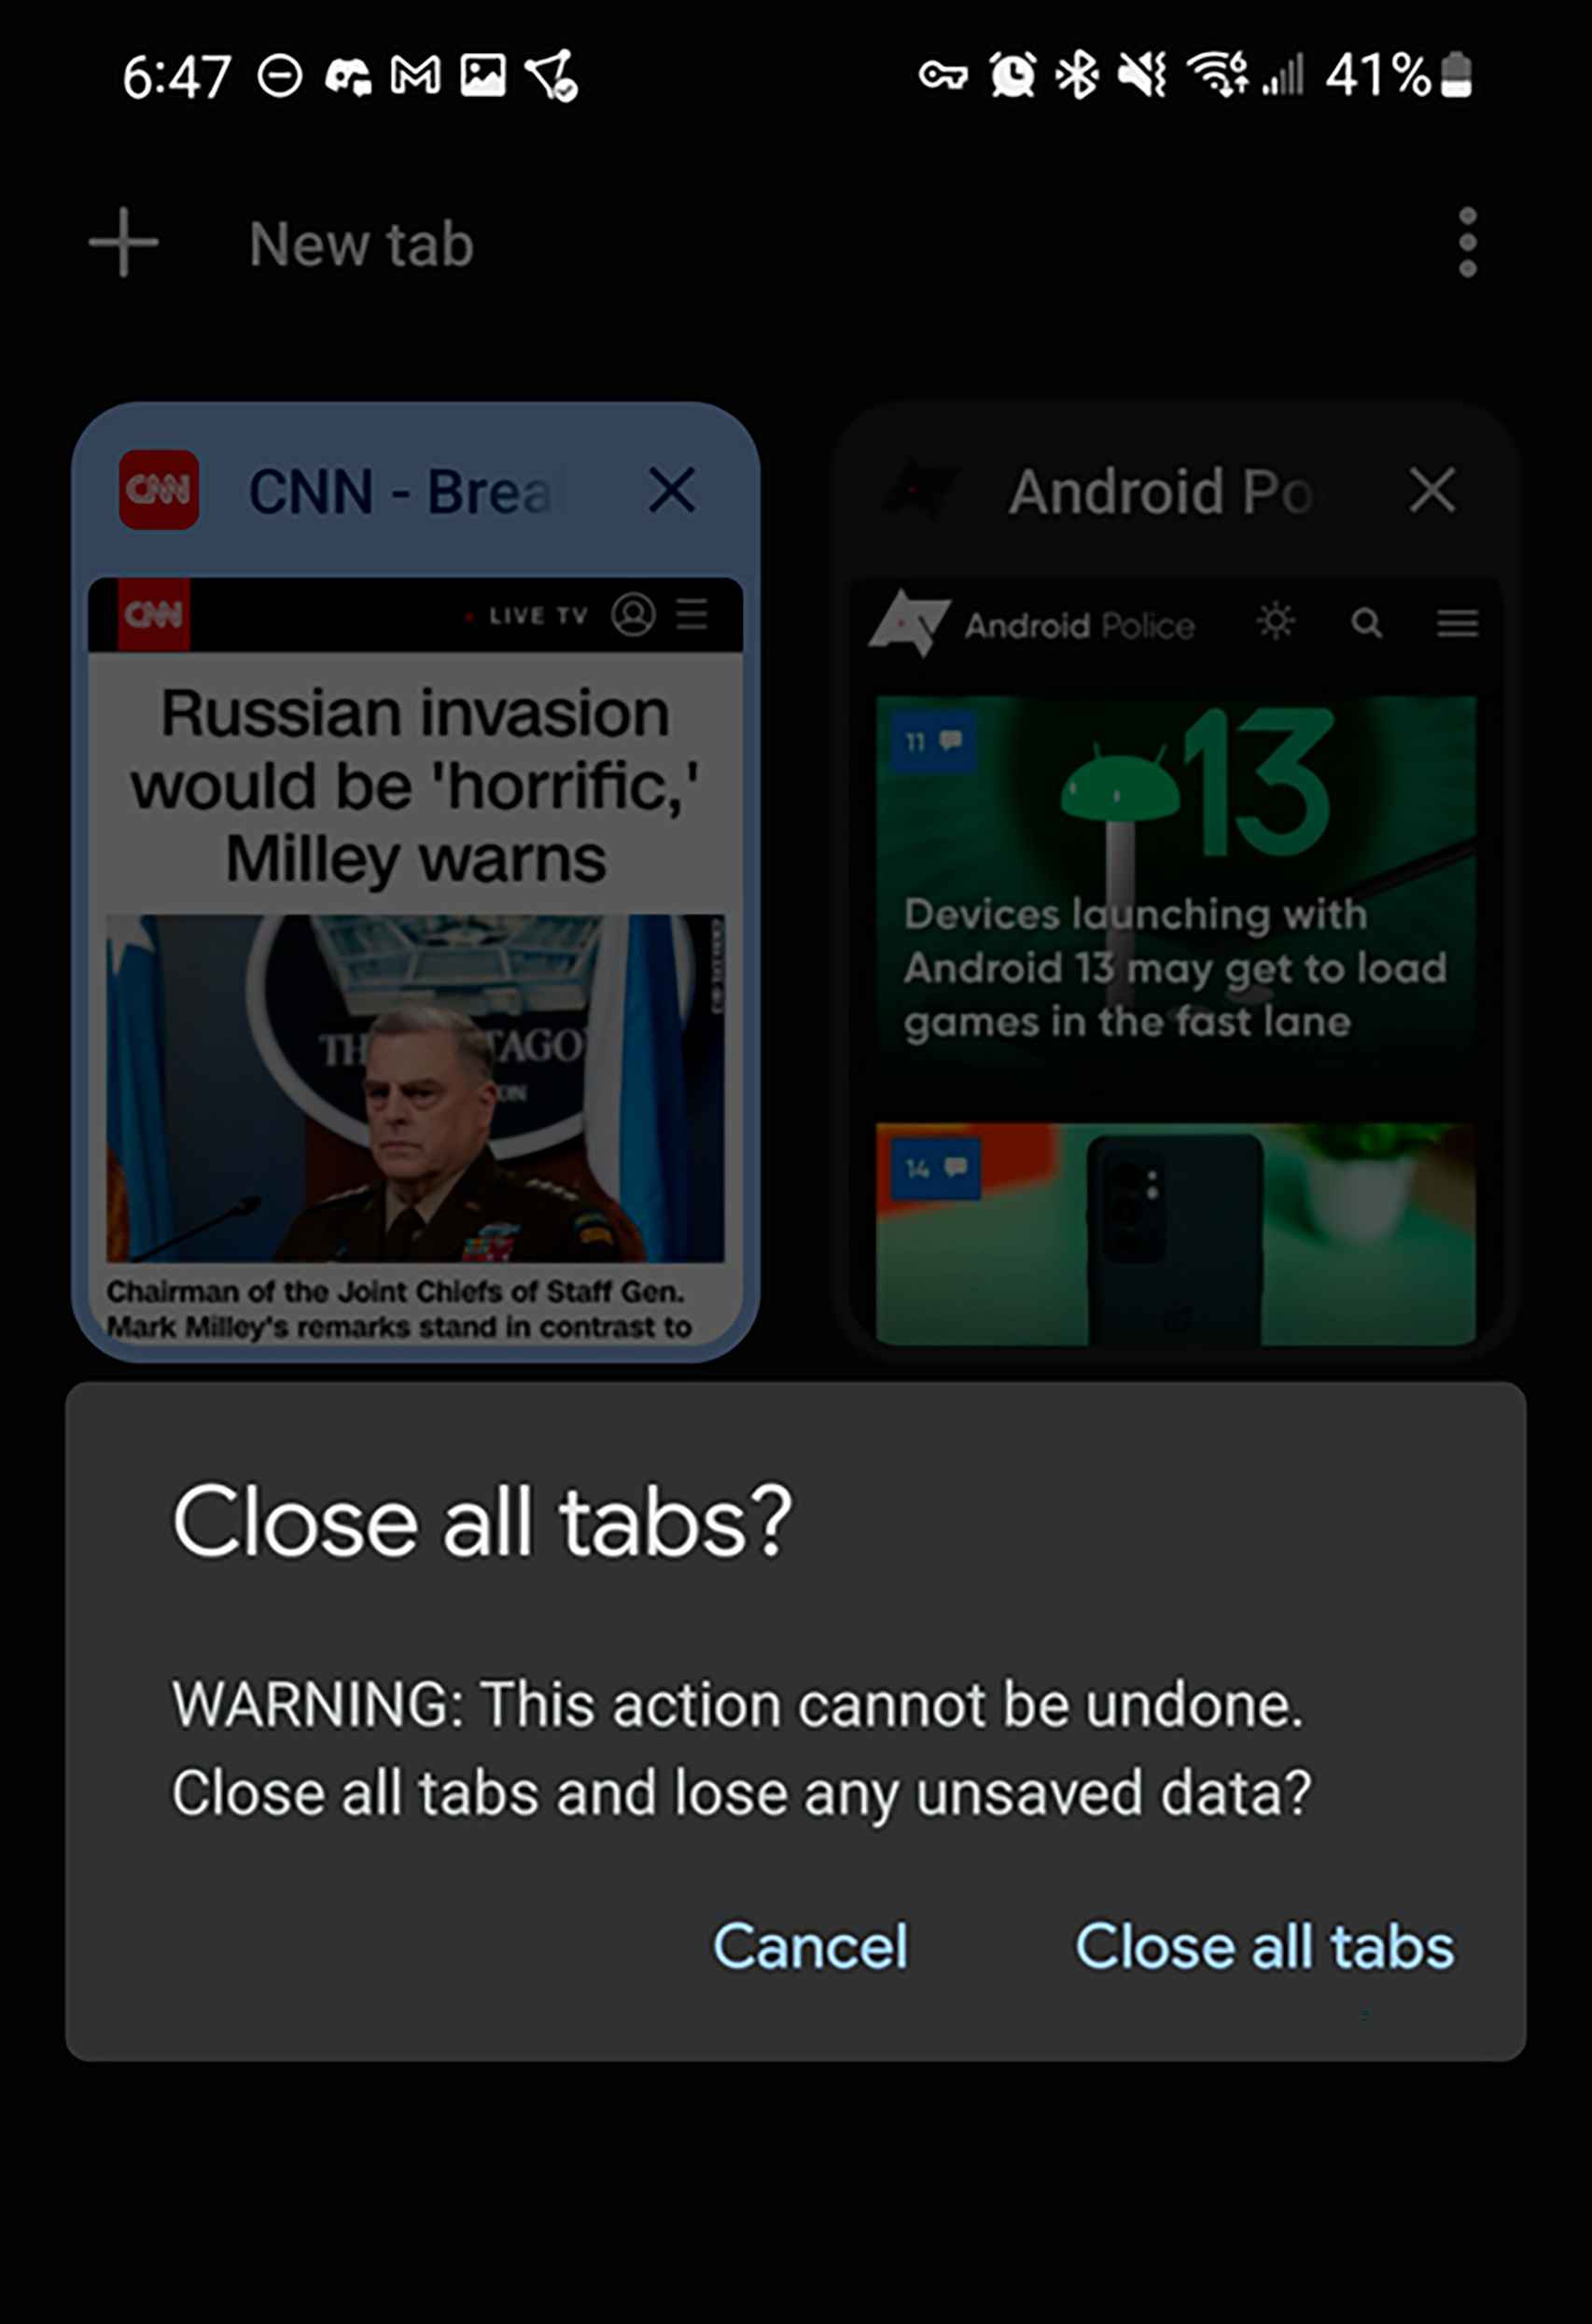 New window to confirm closing as many tabs